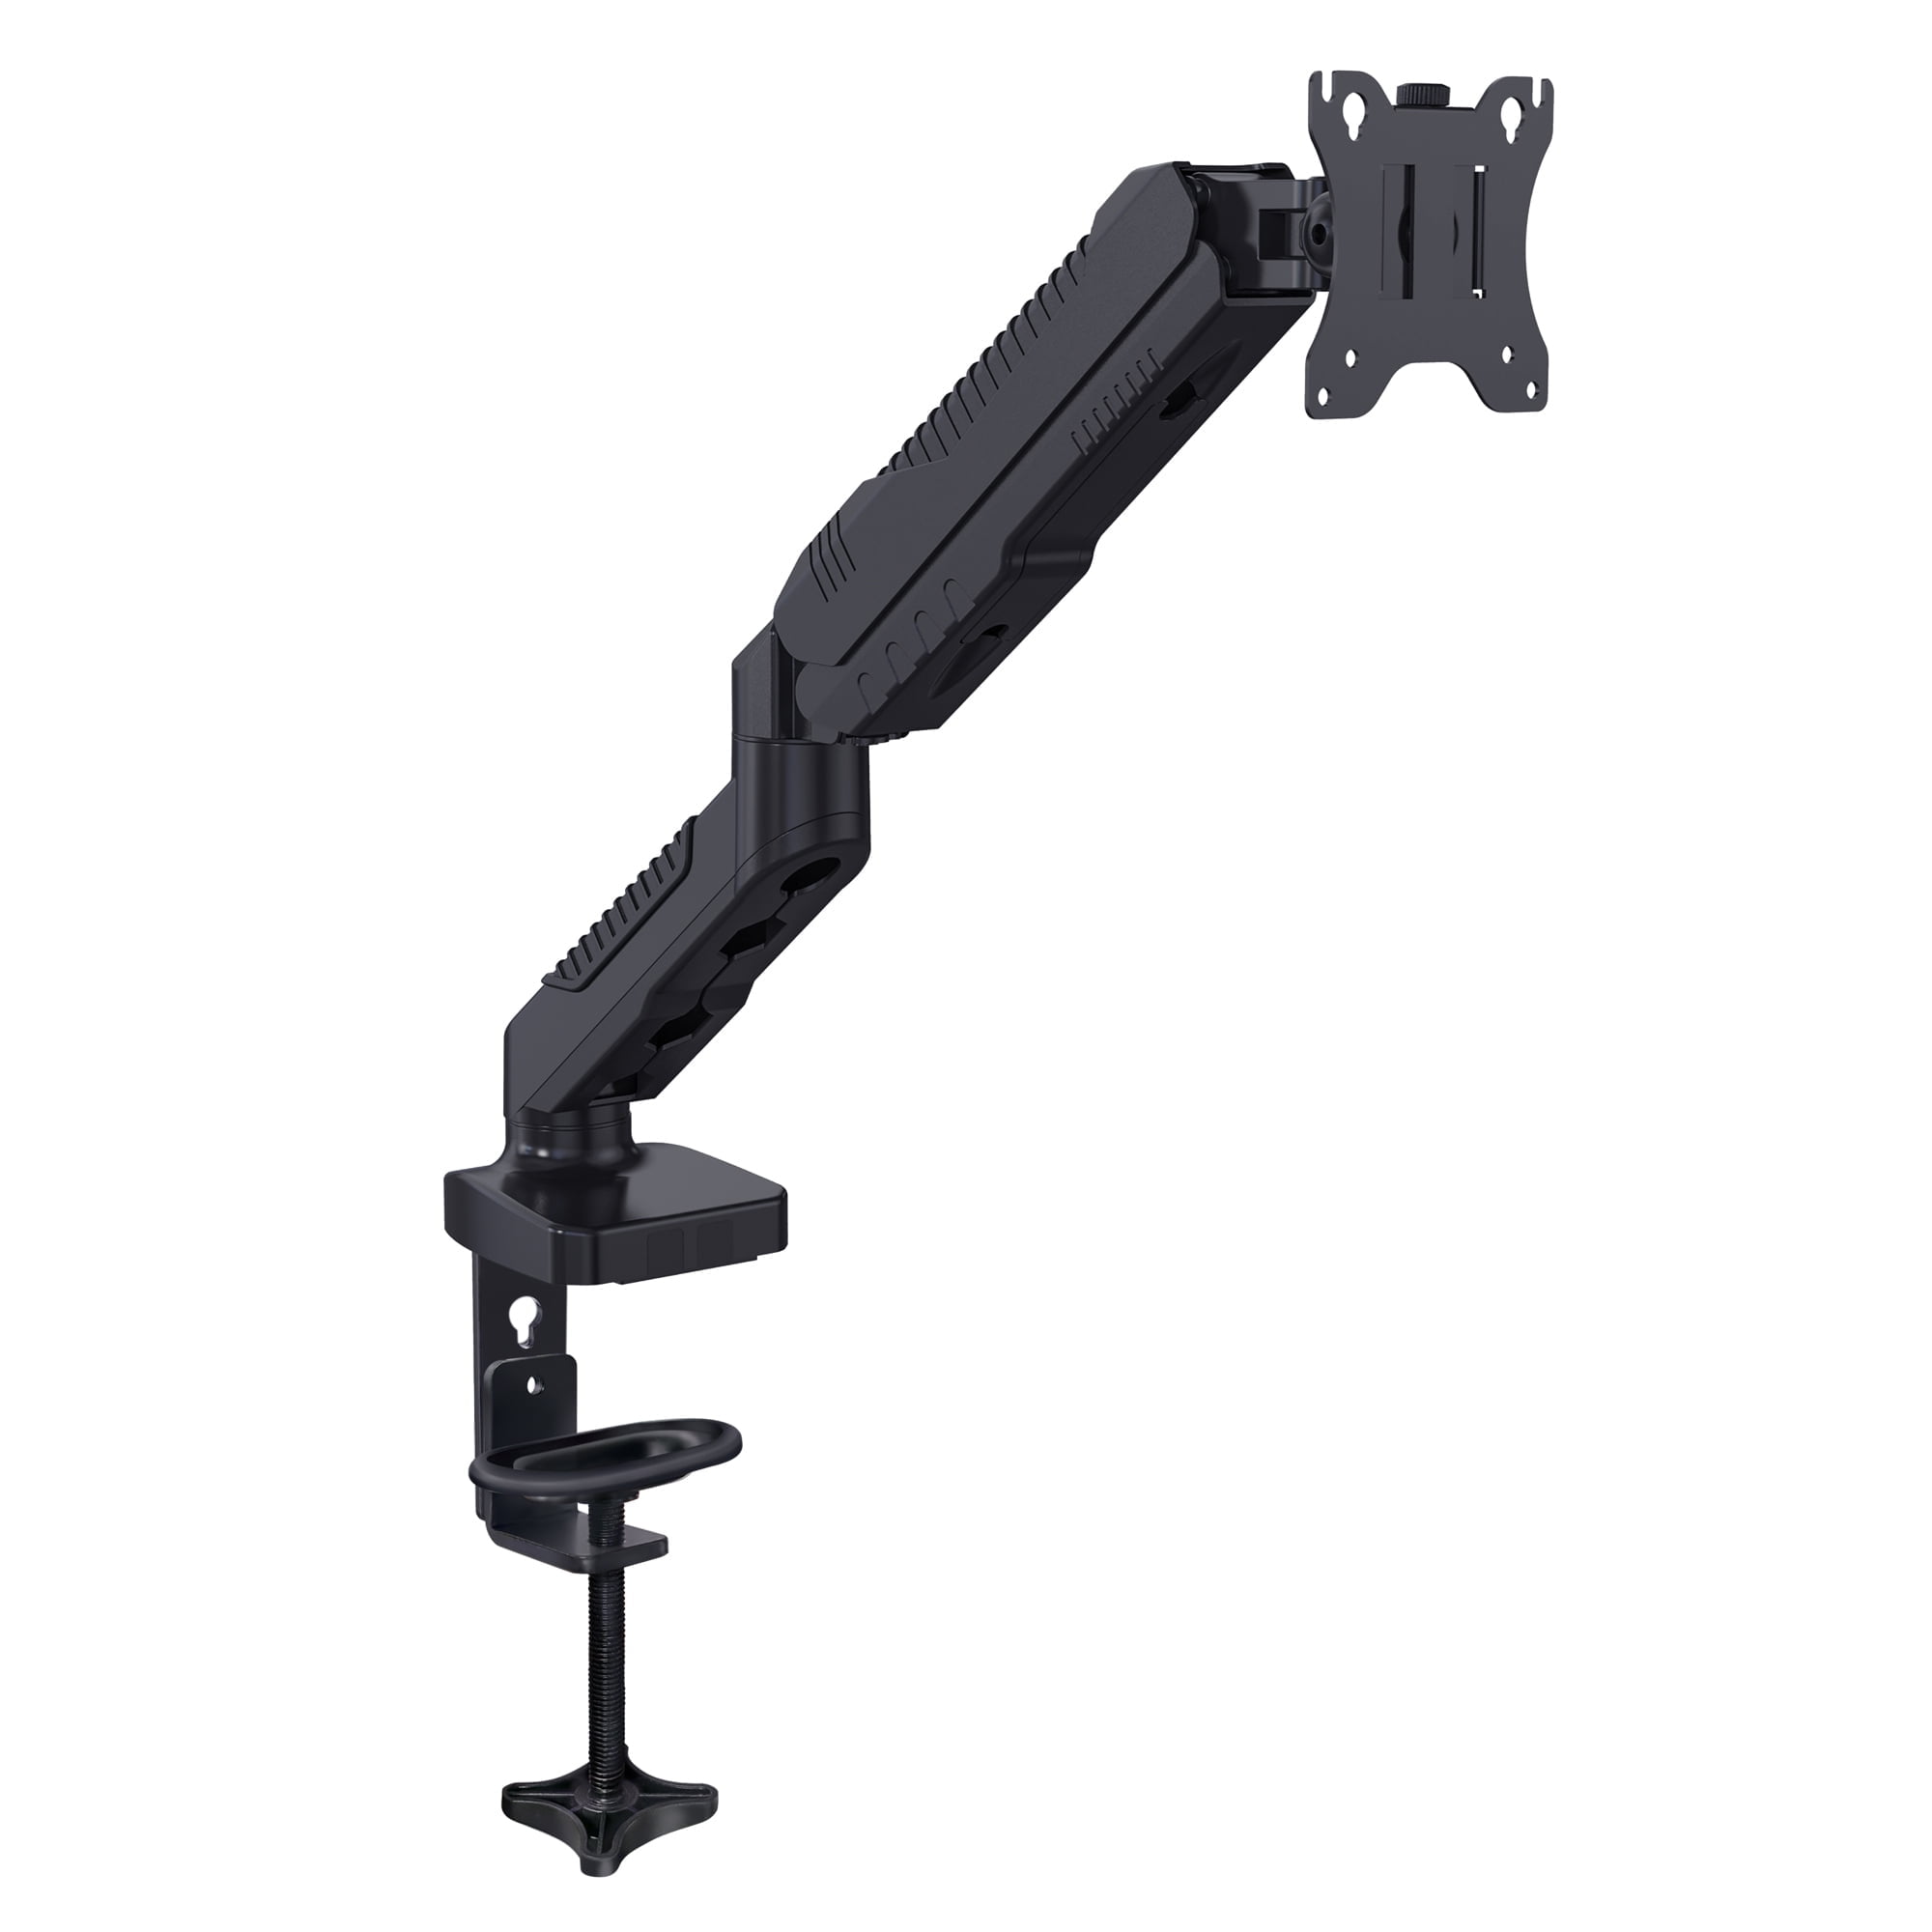 ApexDesk Dual Monitor Arm Desk Mount – Adjustable Height Gas Spring – VESA  Mount with C Clamp & Mounting Base – Computer Monitor Stand for Screen up